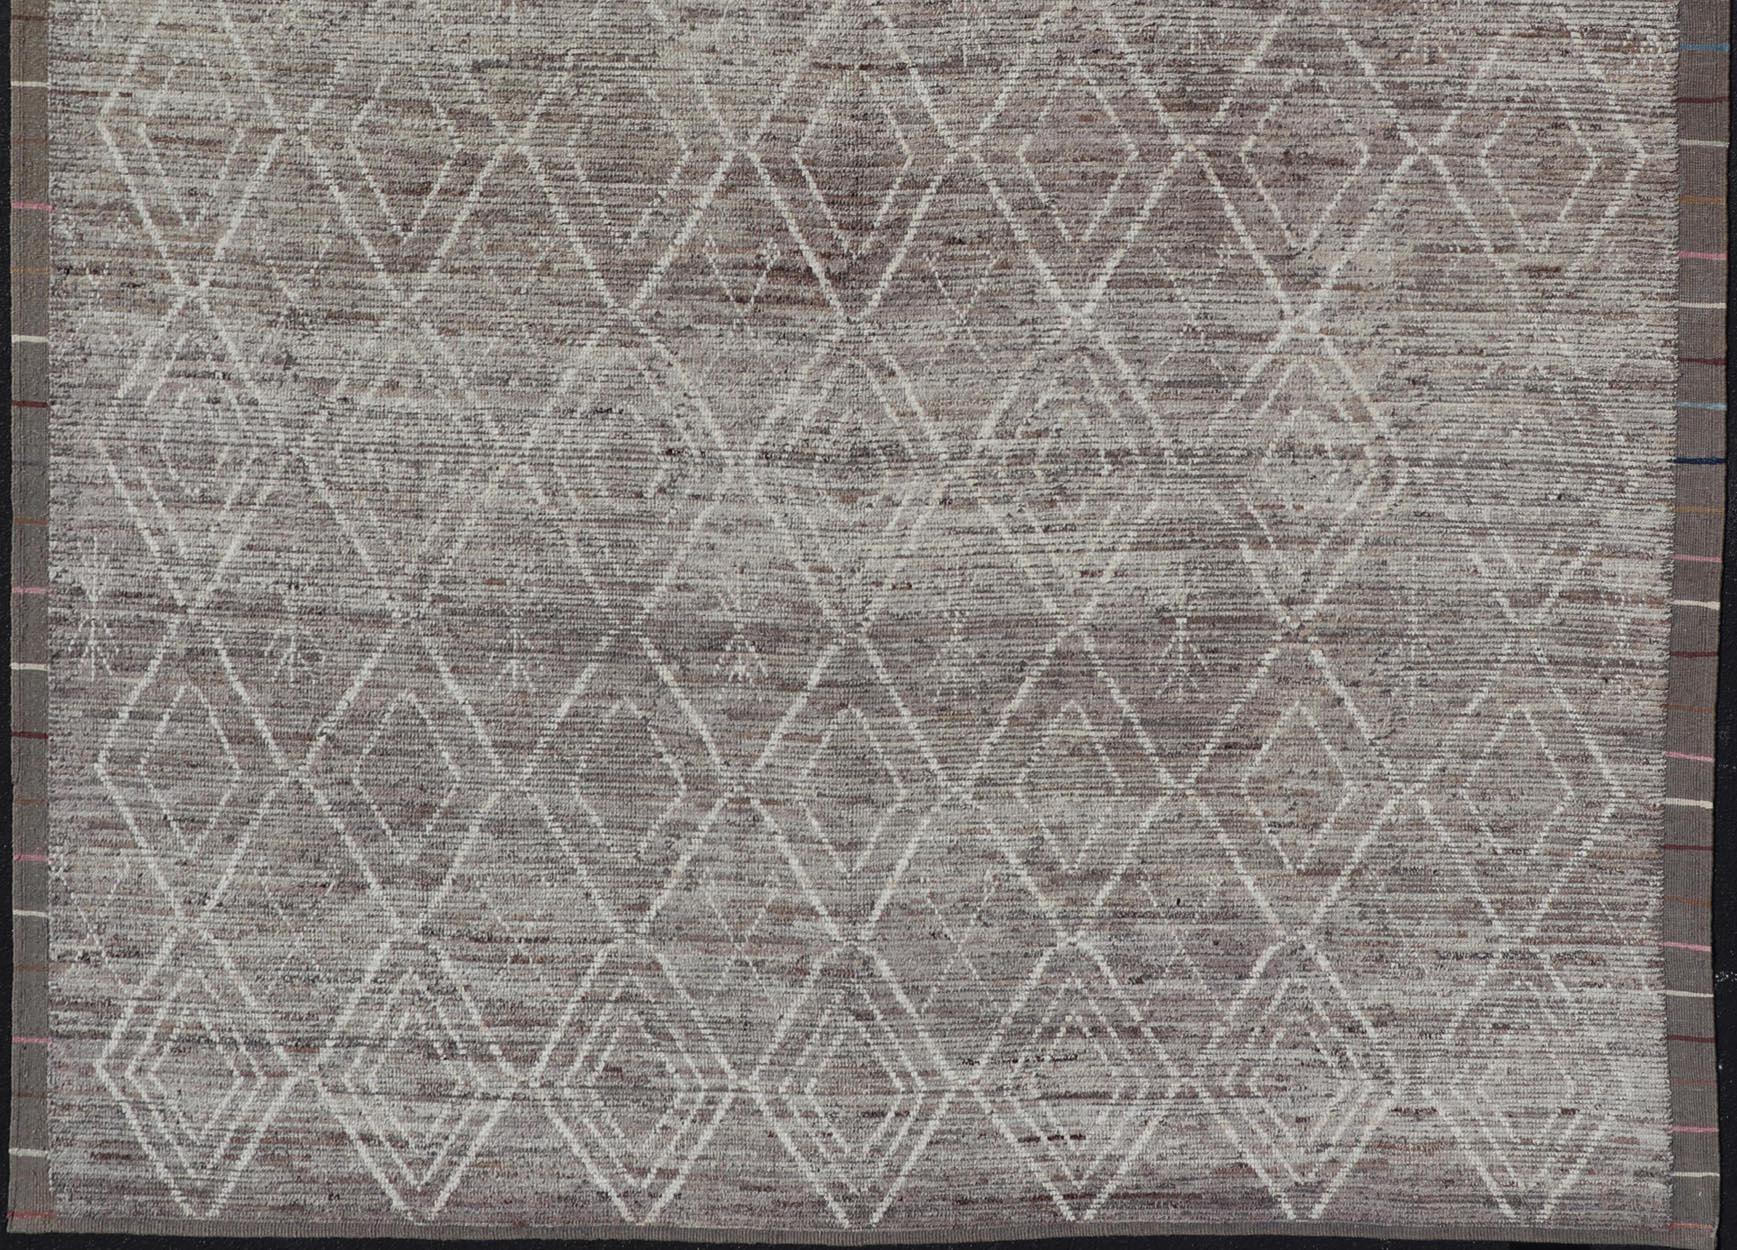 Wool Modern Causal Contemporary Rug in Moroccan Design in Variegated Gray and Cream